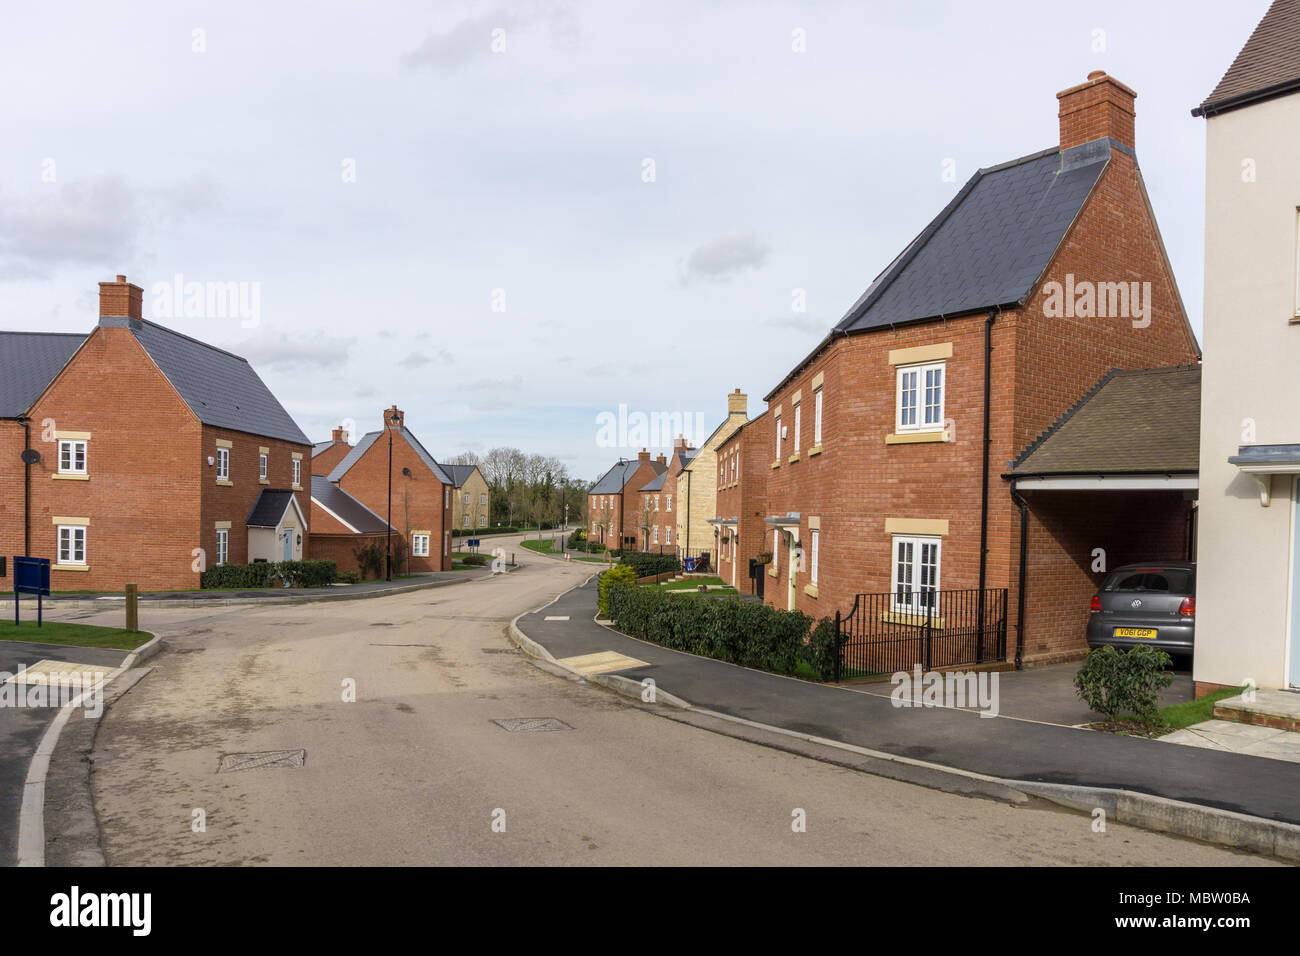 St Georges Fields, an estate of modern private homes on the outskirts of Northampton, UK Stock Photo